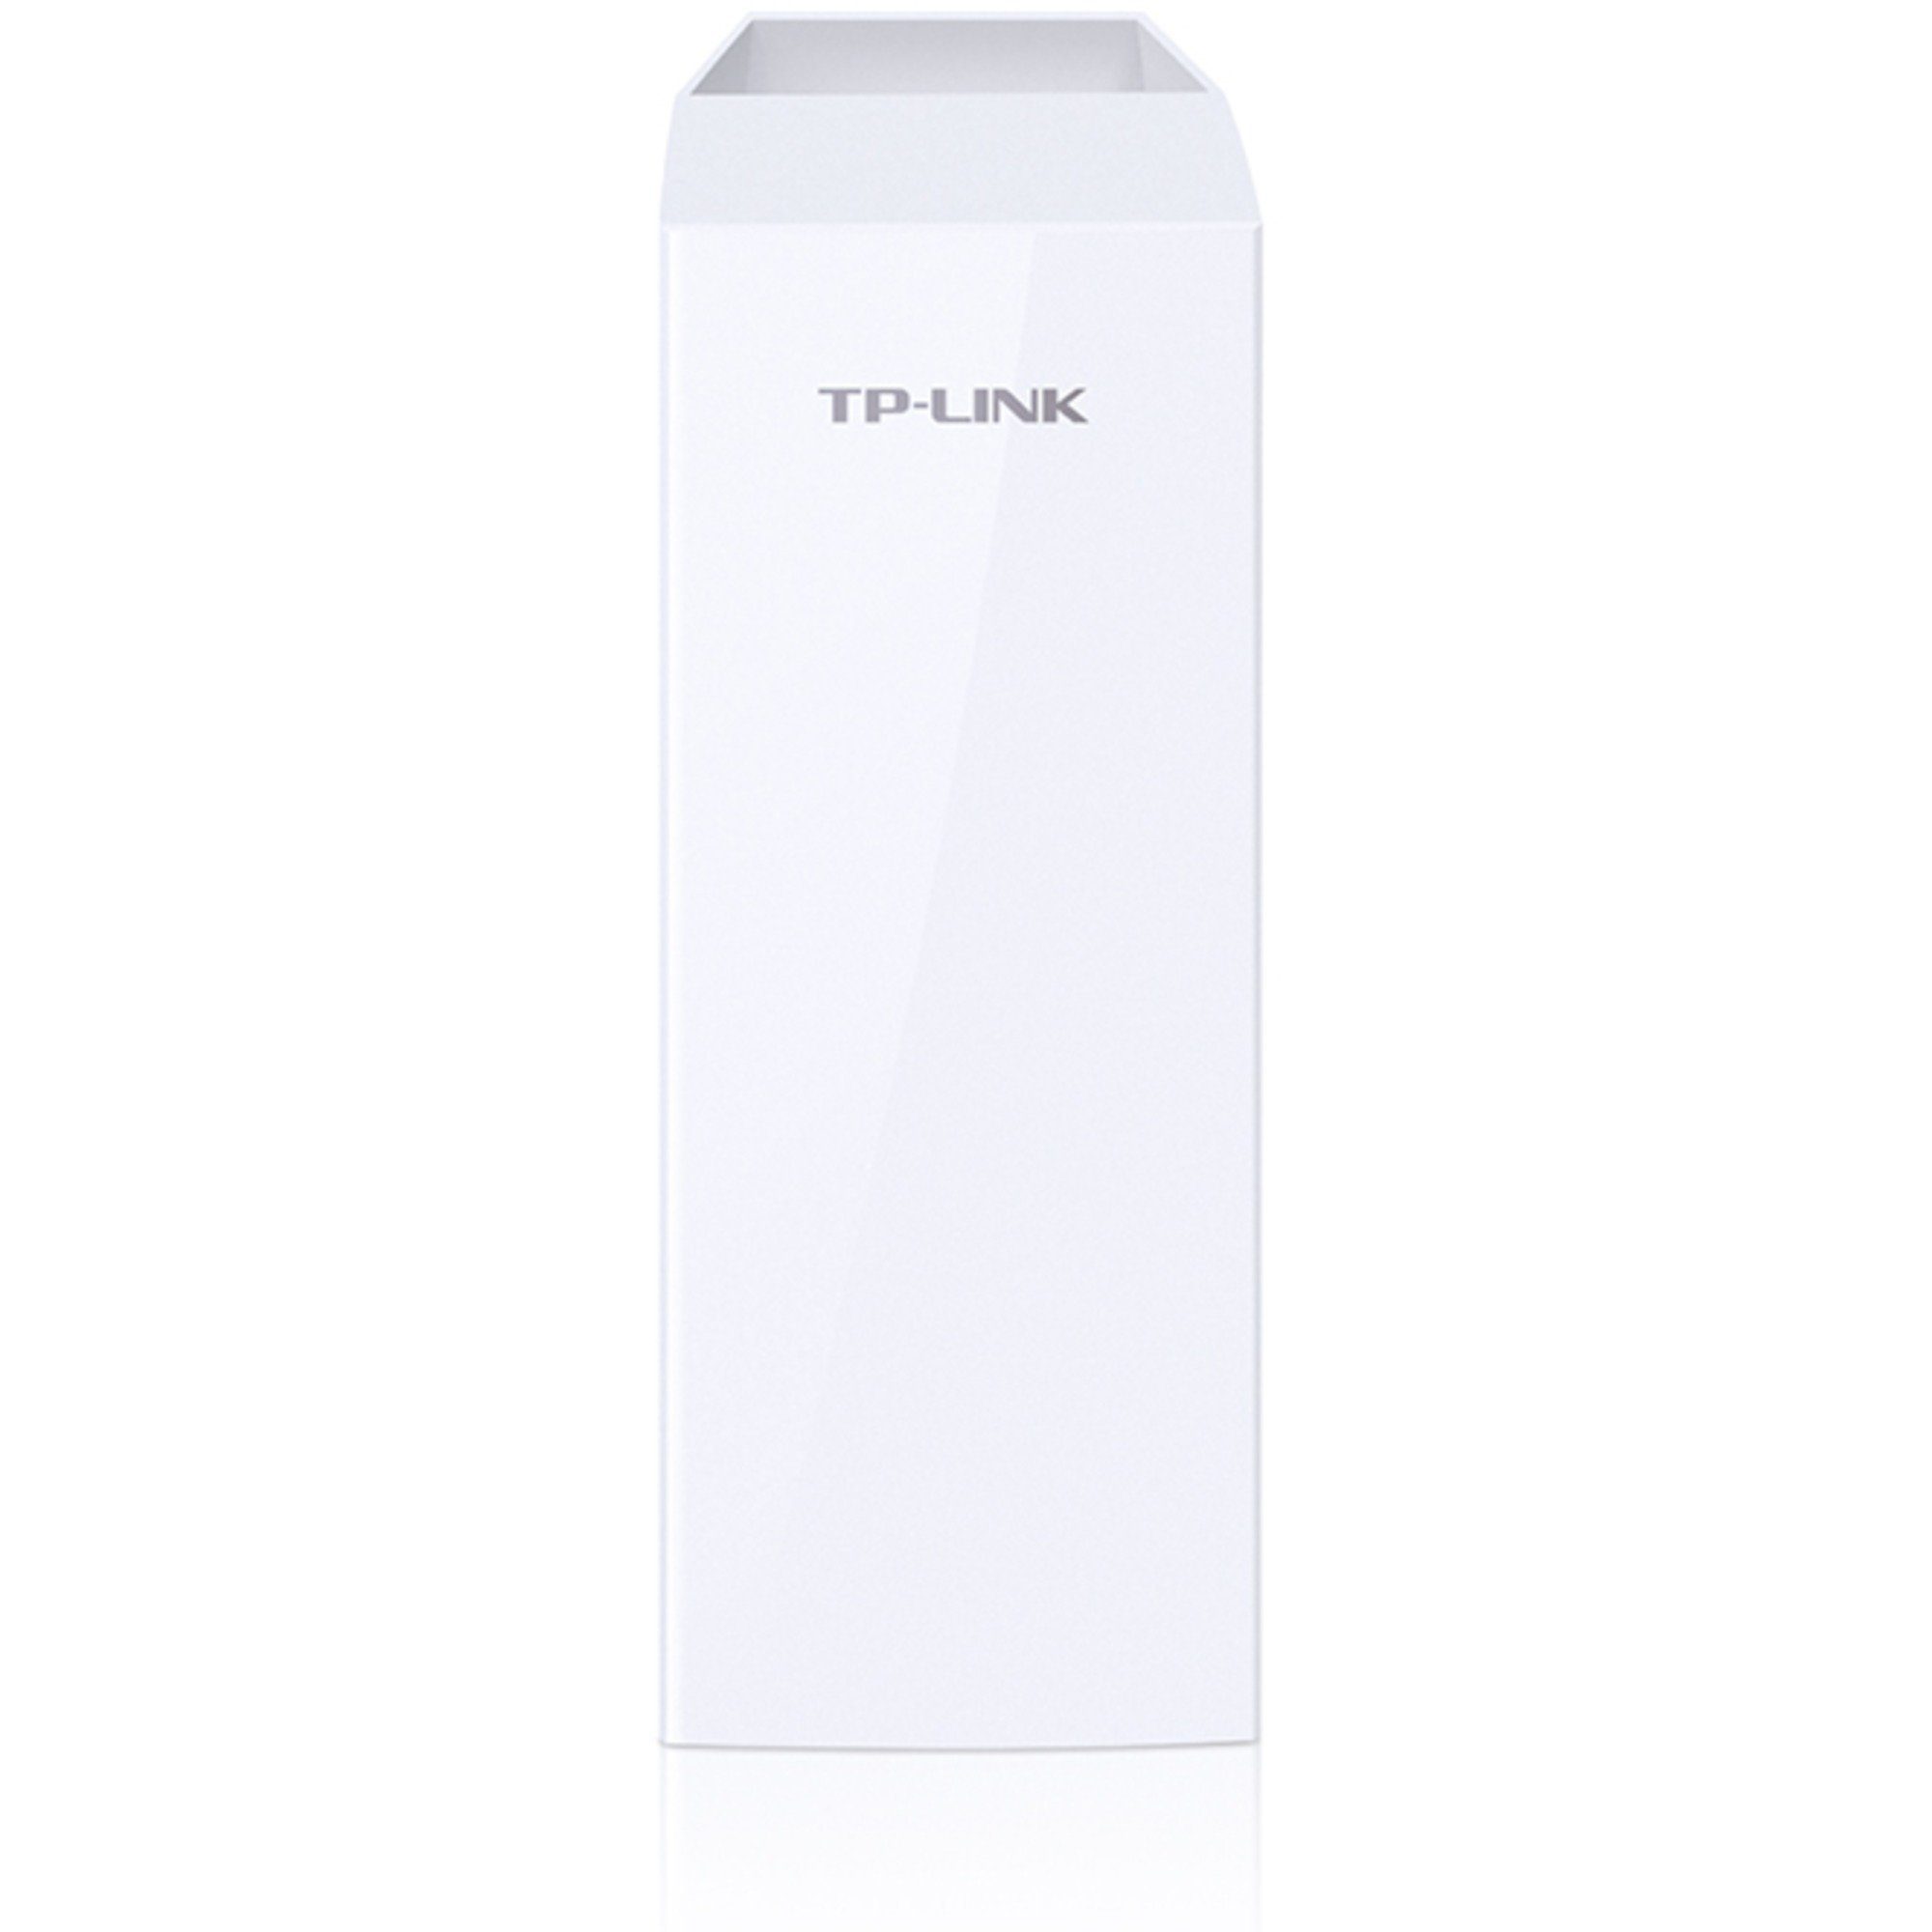 WLAN-Repeater Access TP-Link Pharos Point CPE210, TP-Link